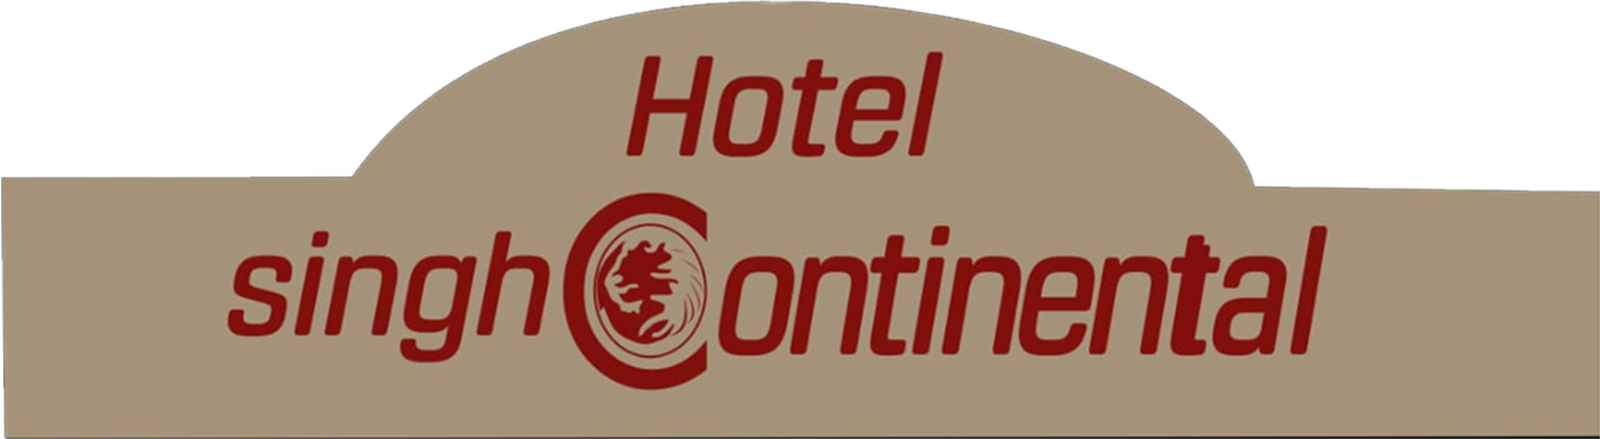 Hotel Singh Continental|Home-stay|Accomodation